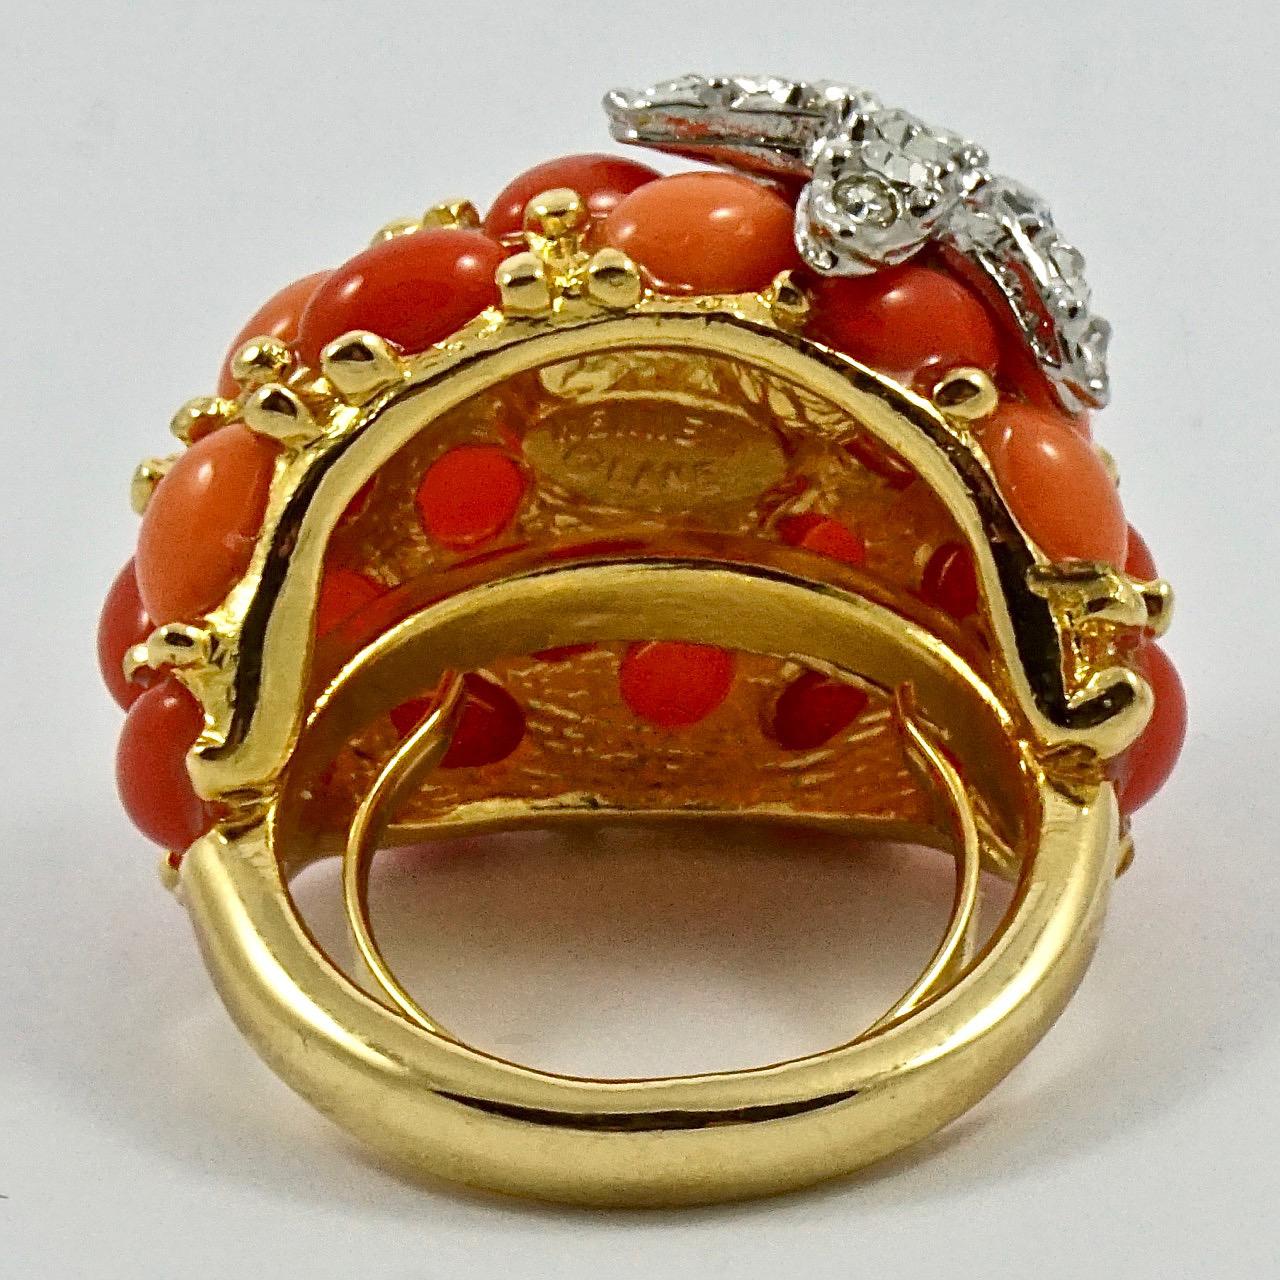 Beautiful Kenneth Jay Lane gold plated bombé cocktail ring, set with pale and dark faux coral stones, and embellished with a lovely crystal starfish. Ring size UK N, US 6 1/2, but will adjust to fit a smaller size with the integral sizer. The ring